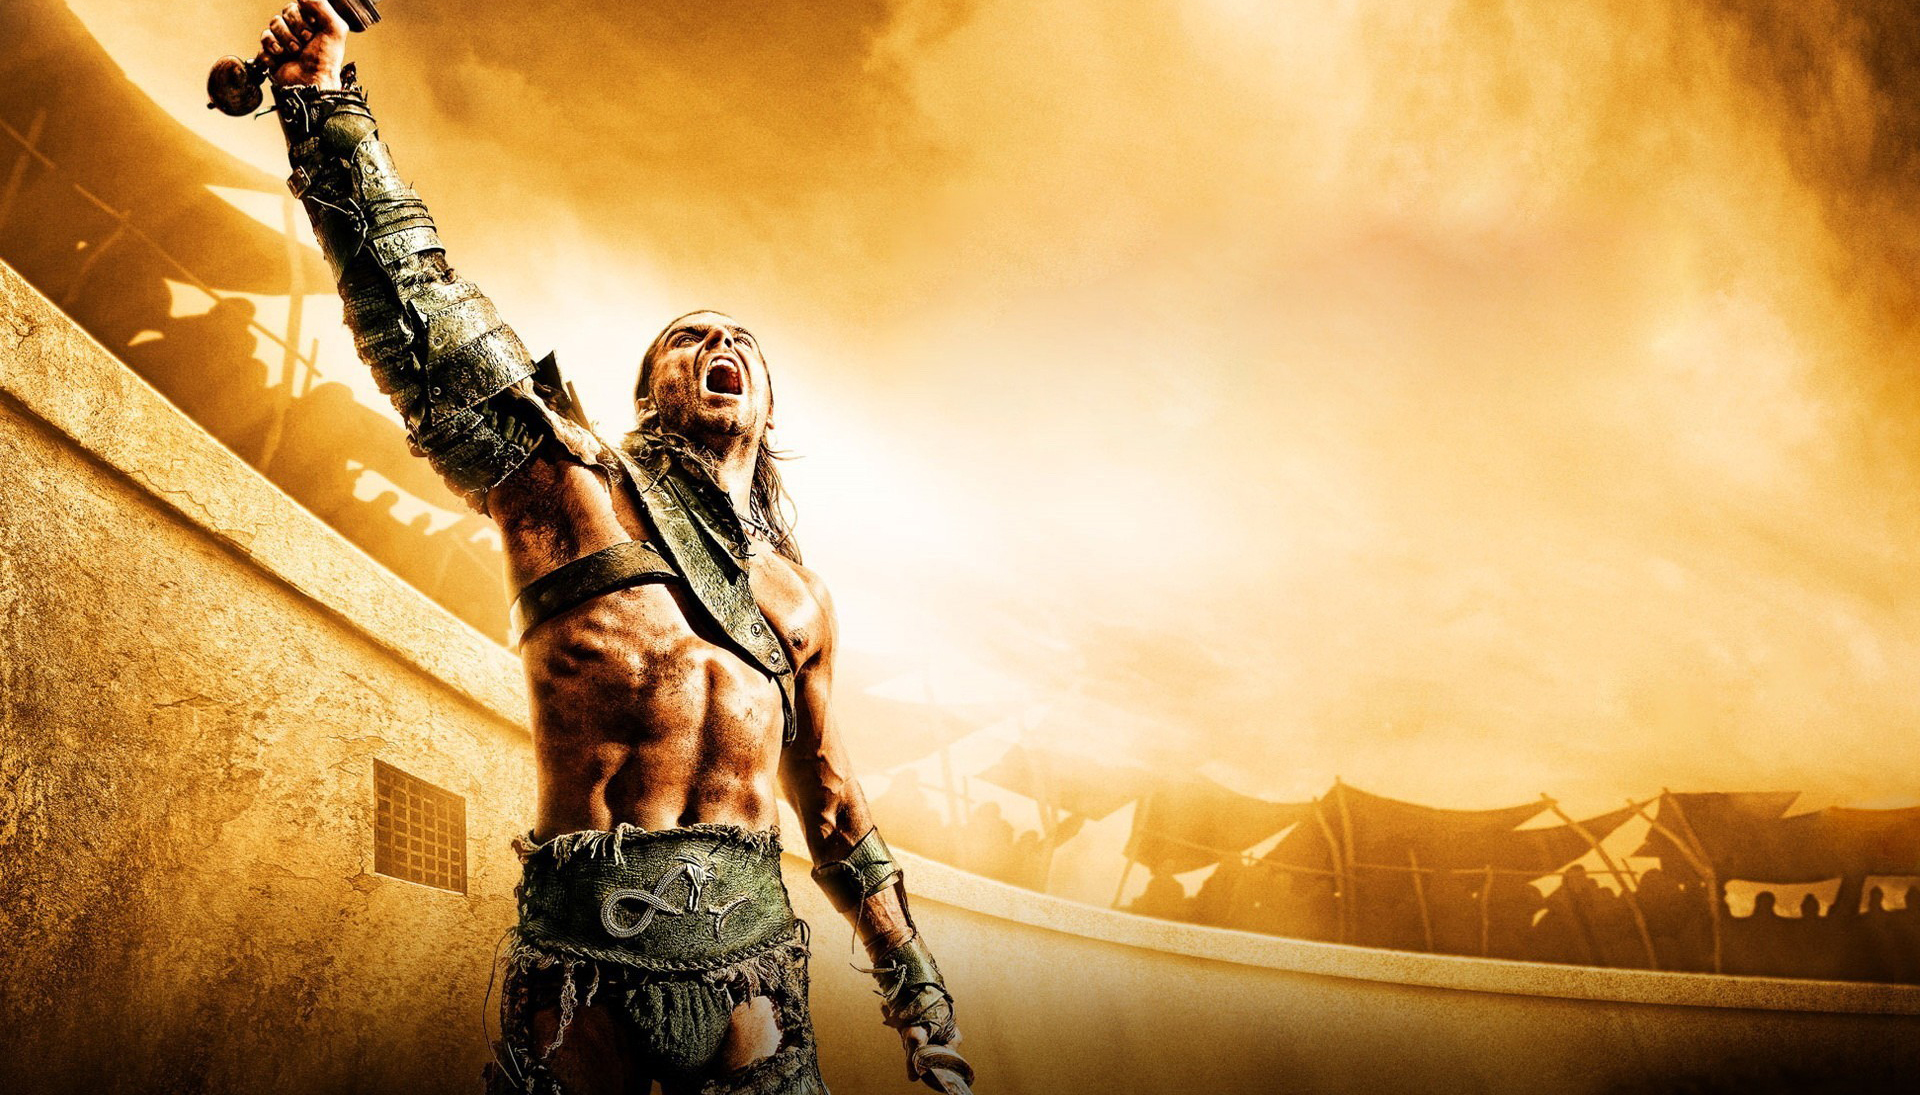 Download Gladiator wallpapers for mobile phone free Gladiator HD  pictures